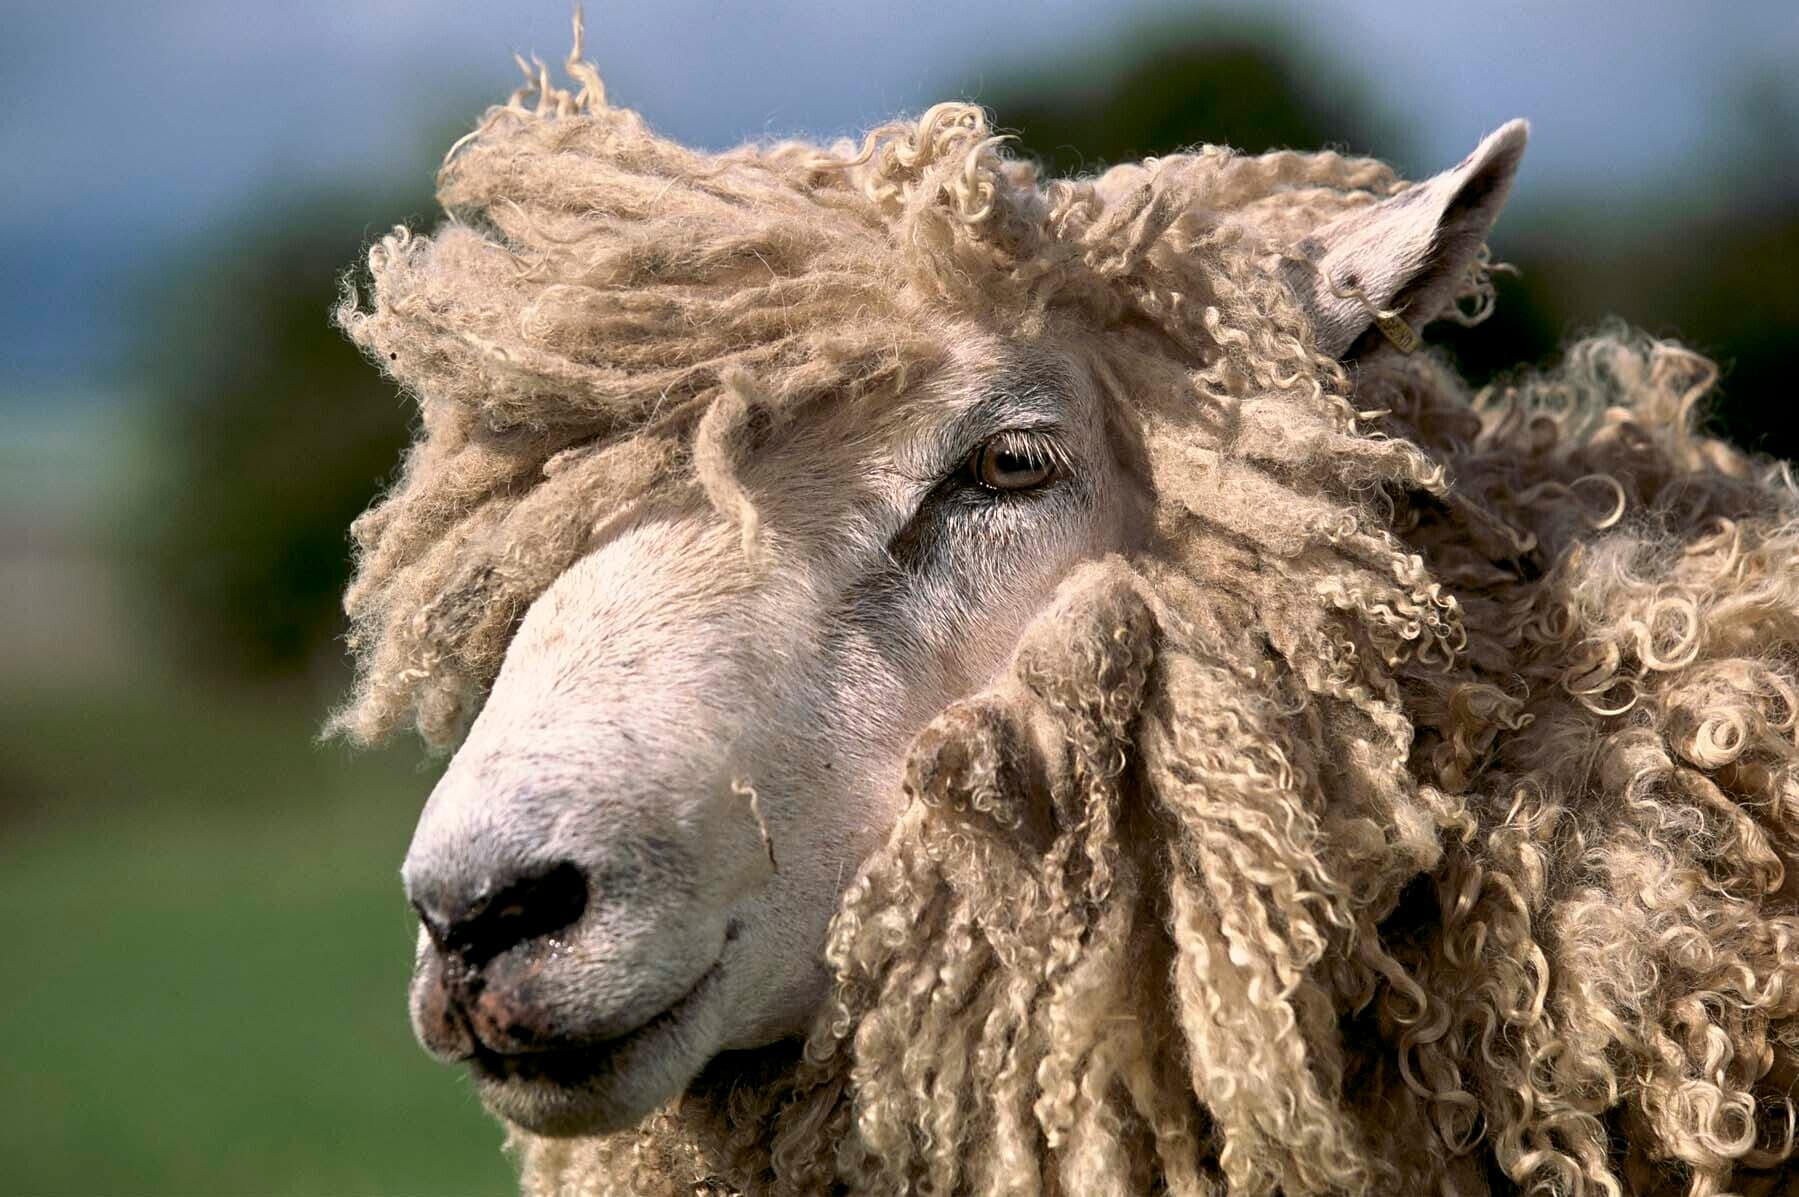 Cotswolds NL - Cotswold Lion Sheep (c) Nick Turner